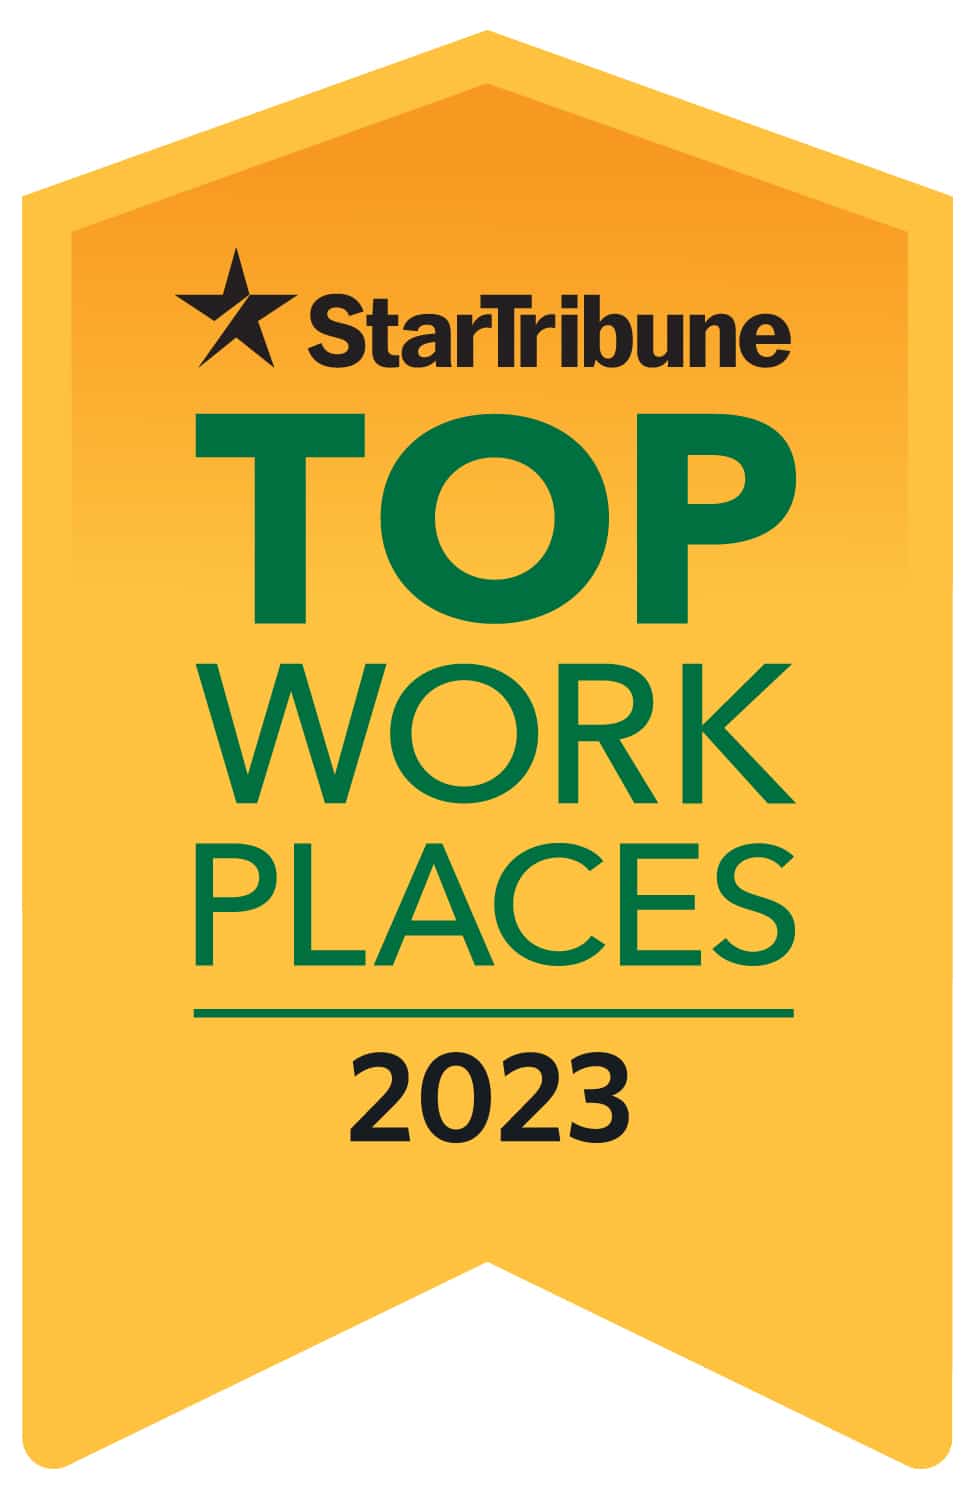 Top Places To Work 2023